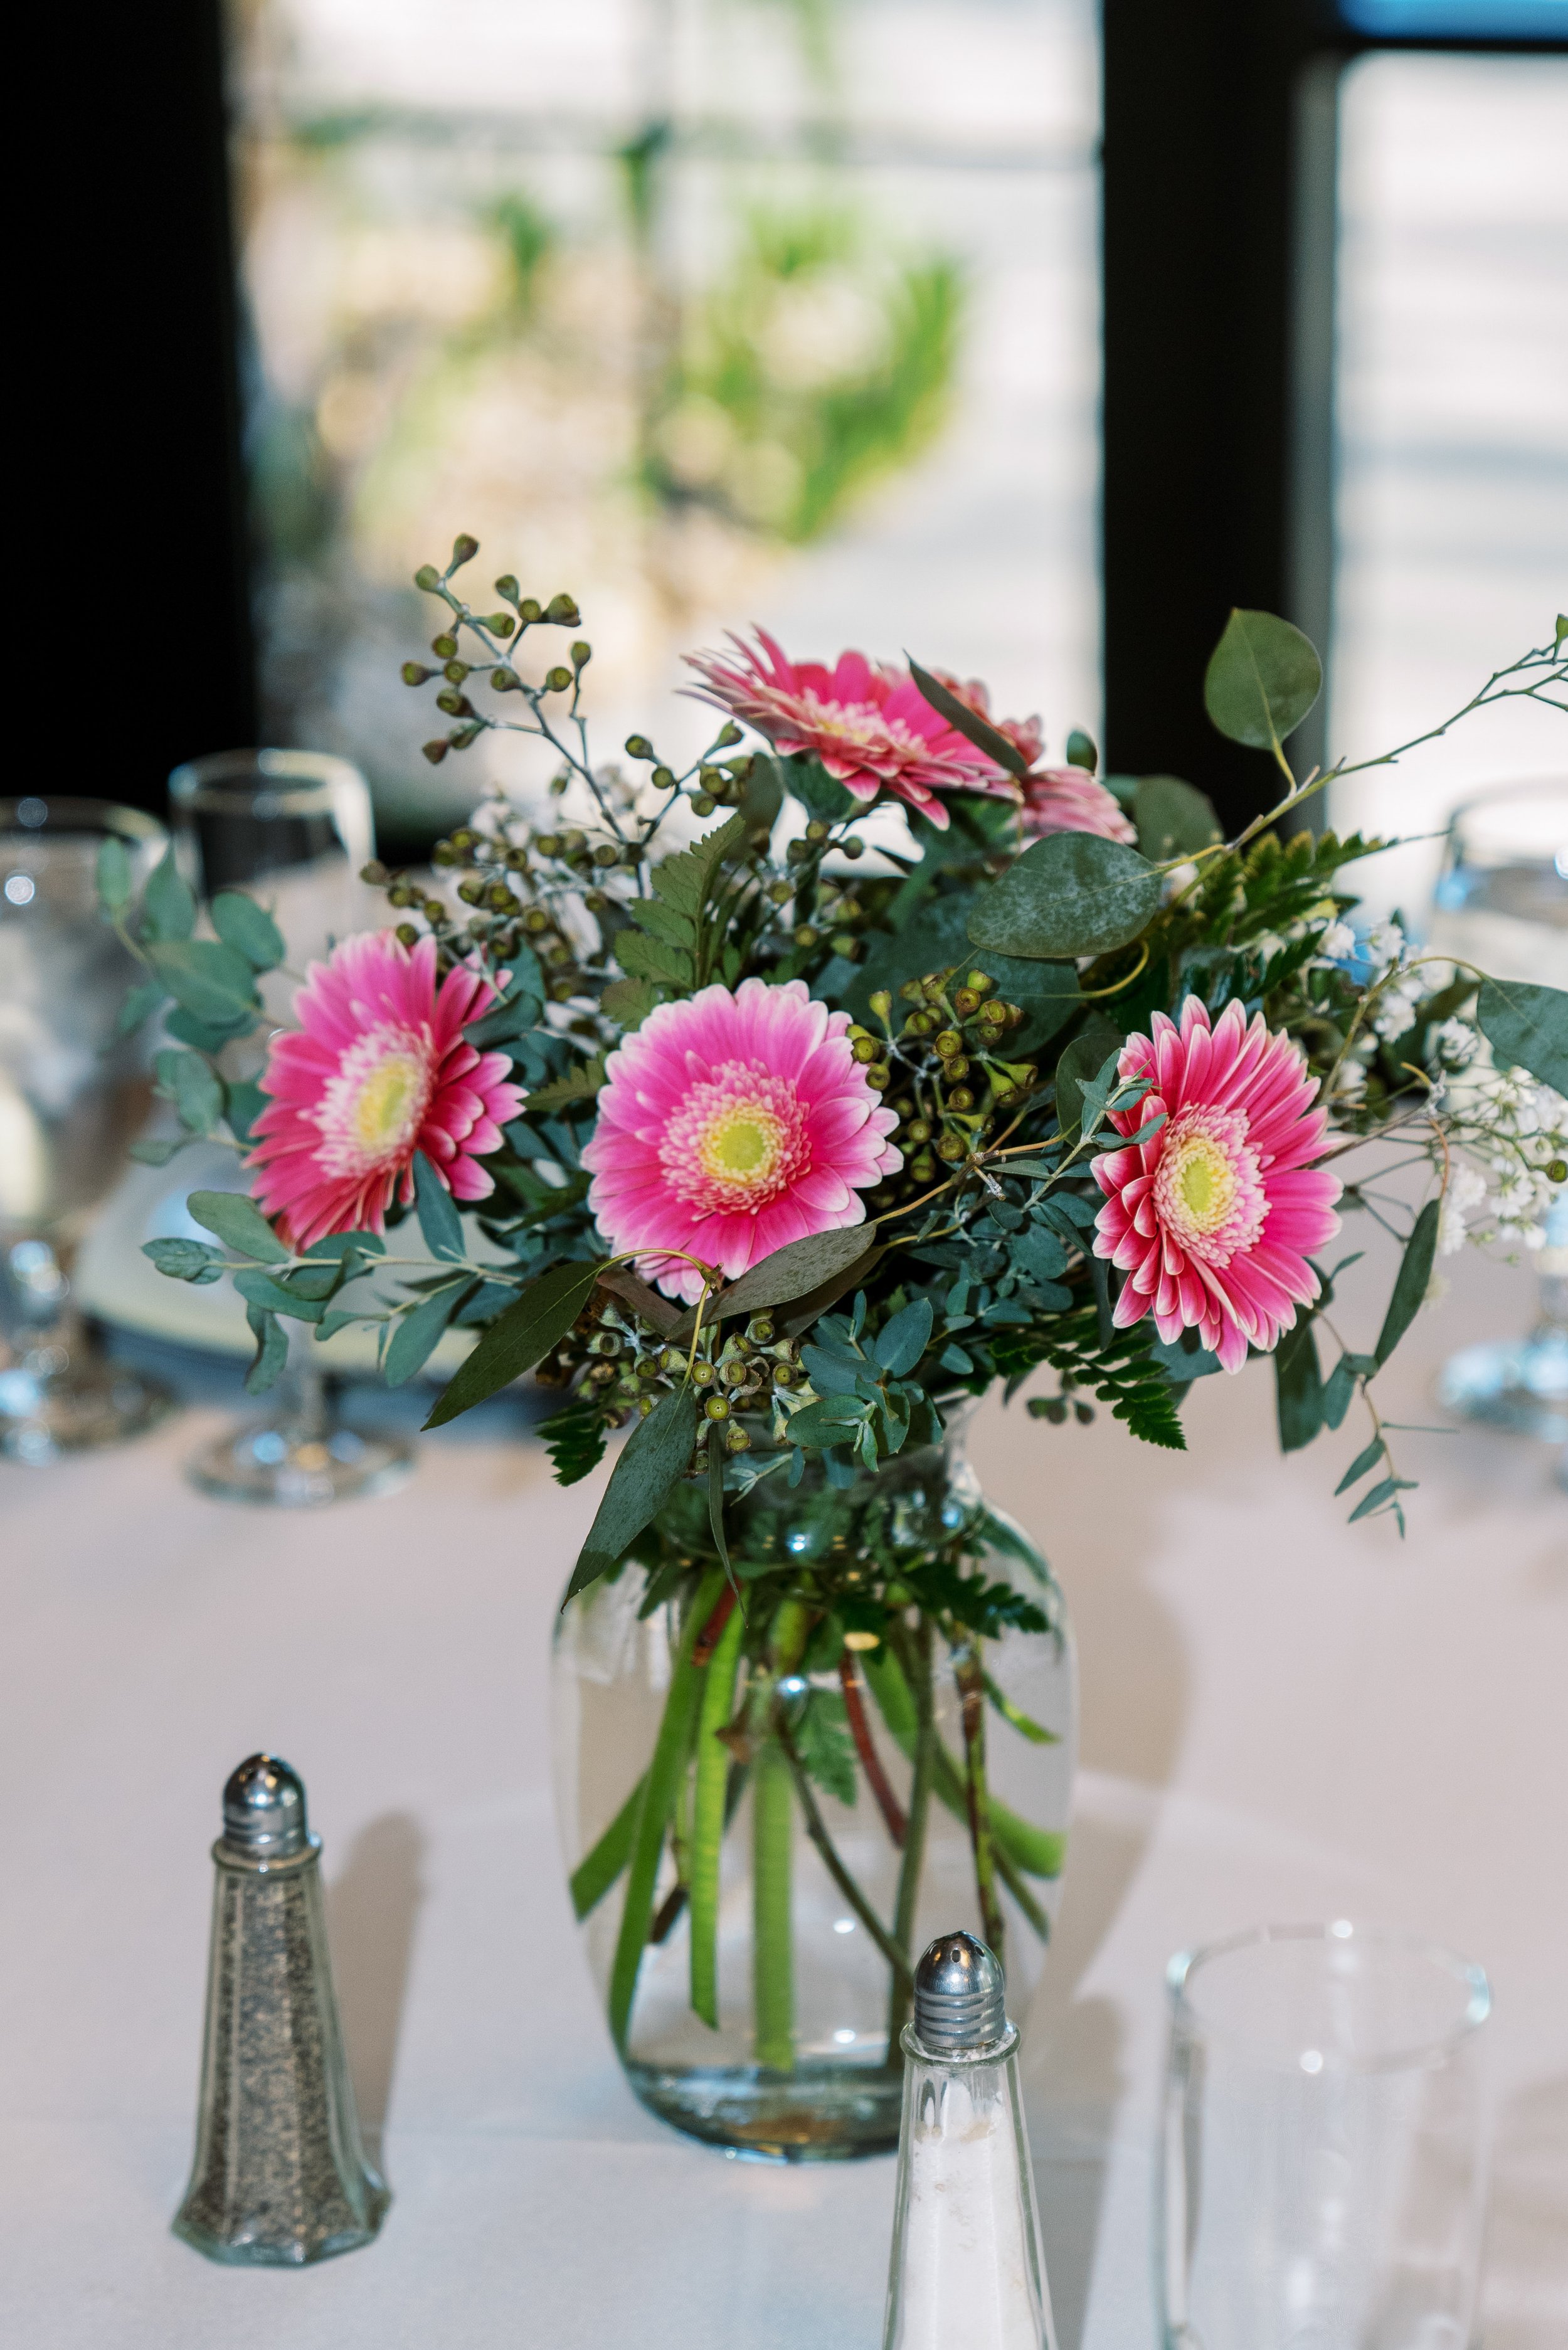  Table Centerpiece Pink Flowers in Vase Cape Fear Botanical Garden Wedding Fancy This Photography